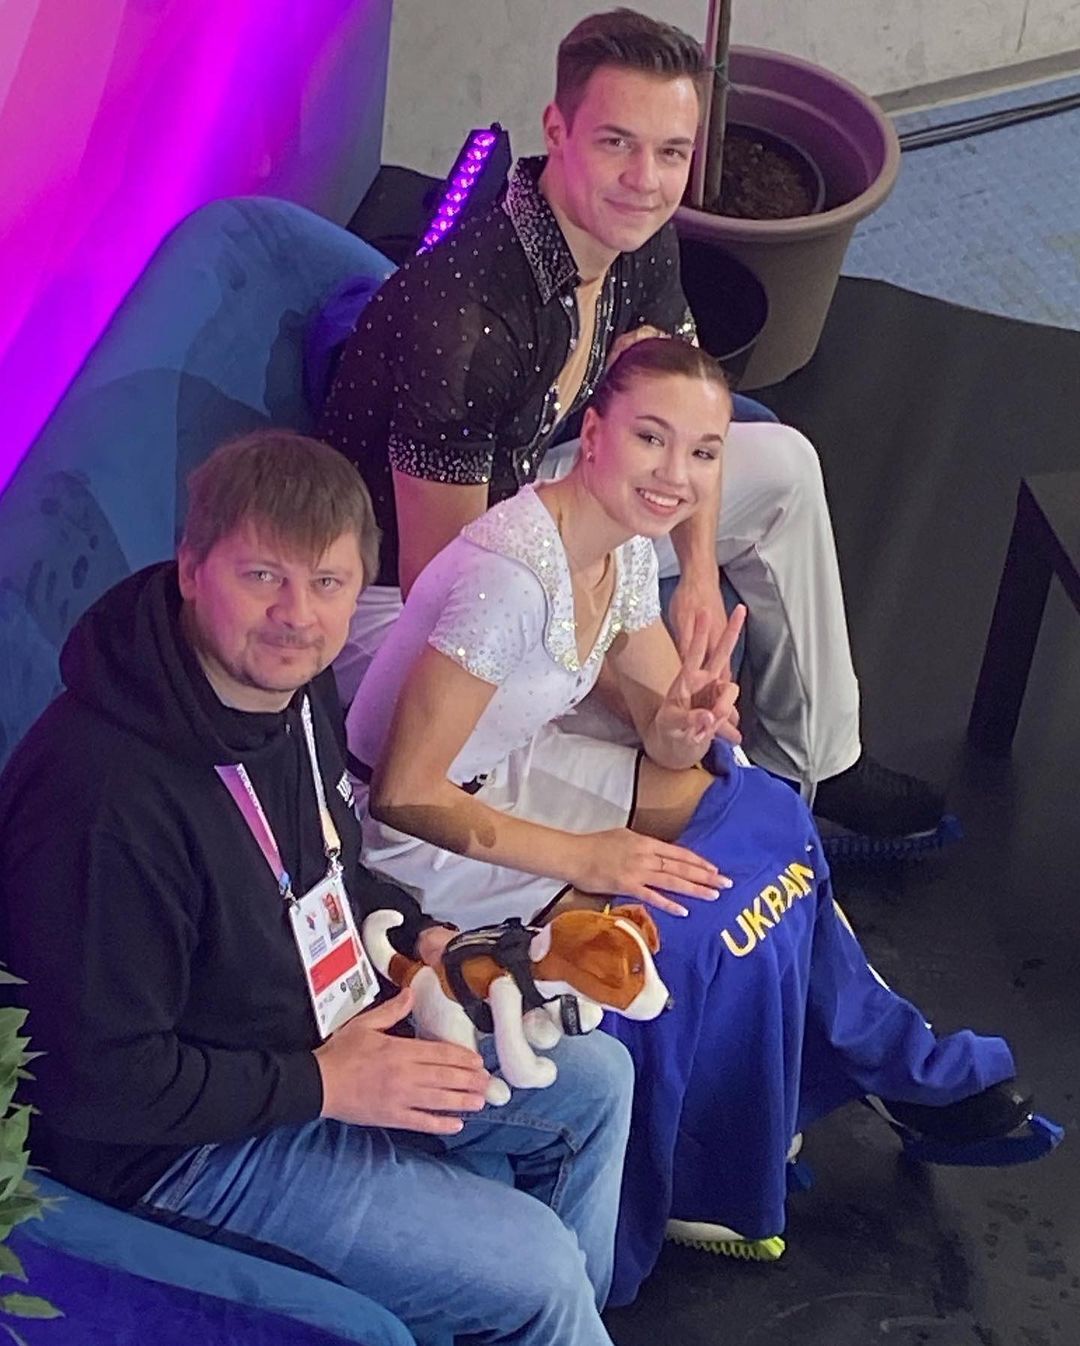 Ukrainian figure skaters disdained to touch Russian Georgians, ignoring them at the awards ceremony. Video.